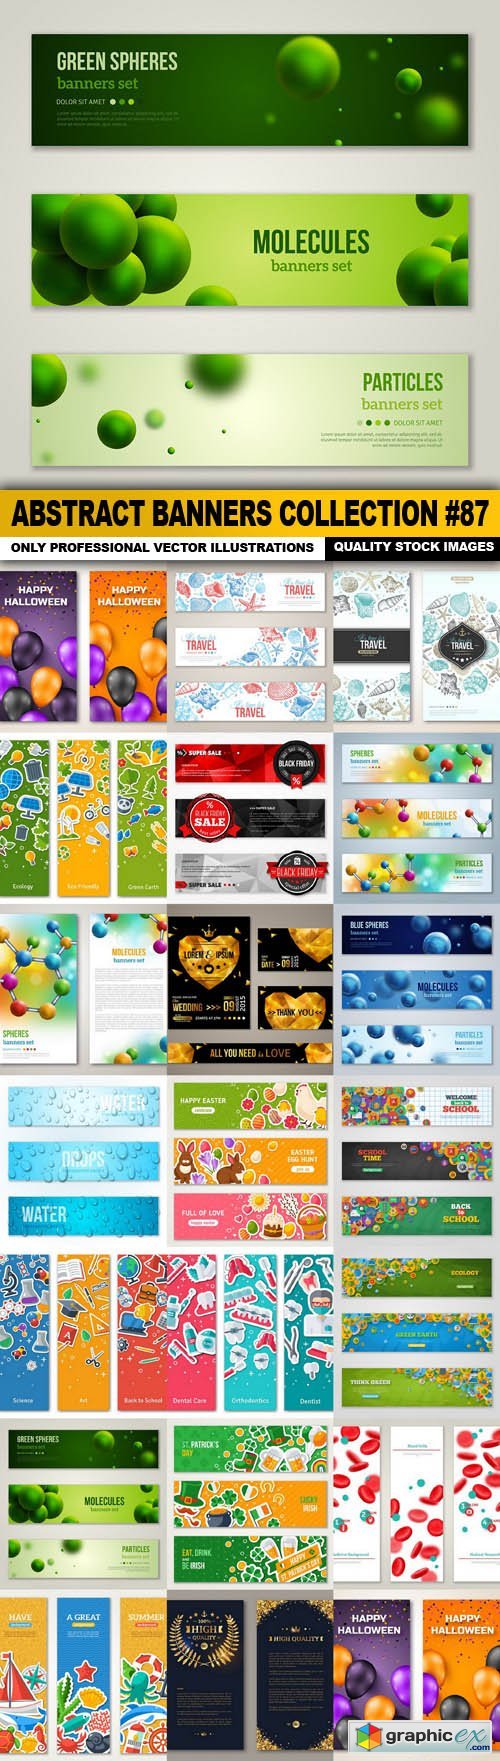 Abstract Banners Collection #87 - 20 Vectors